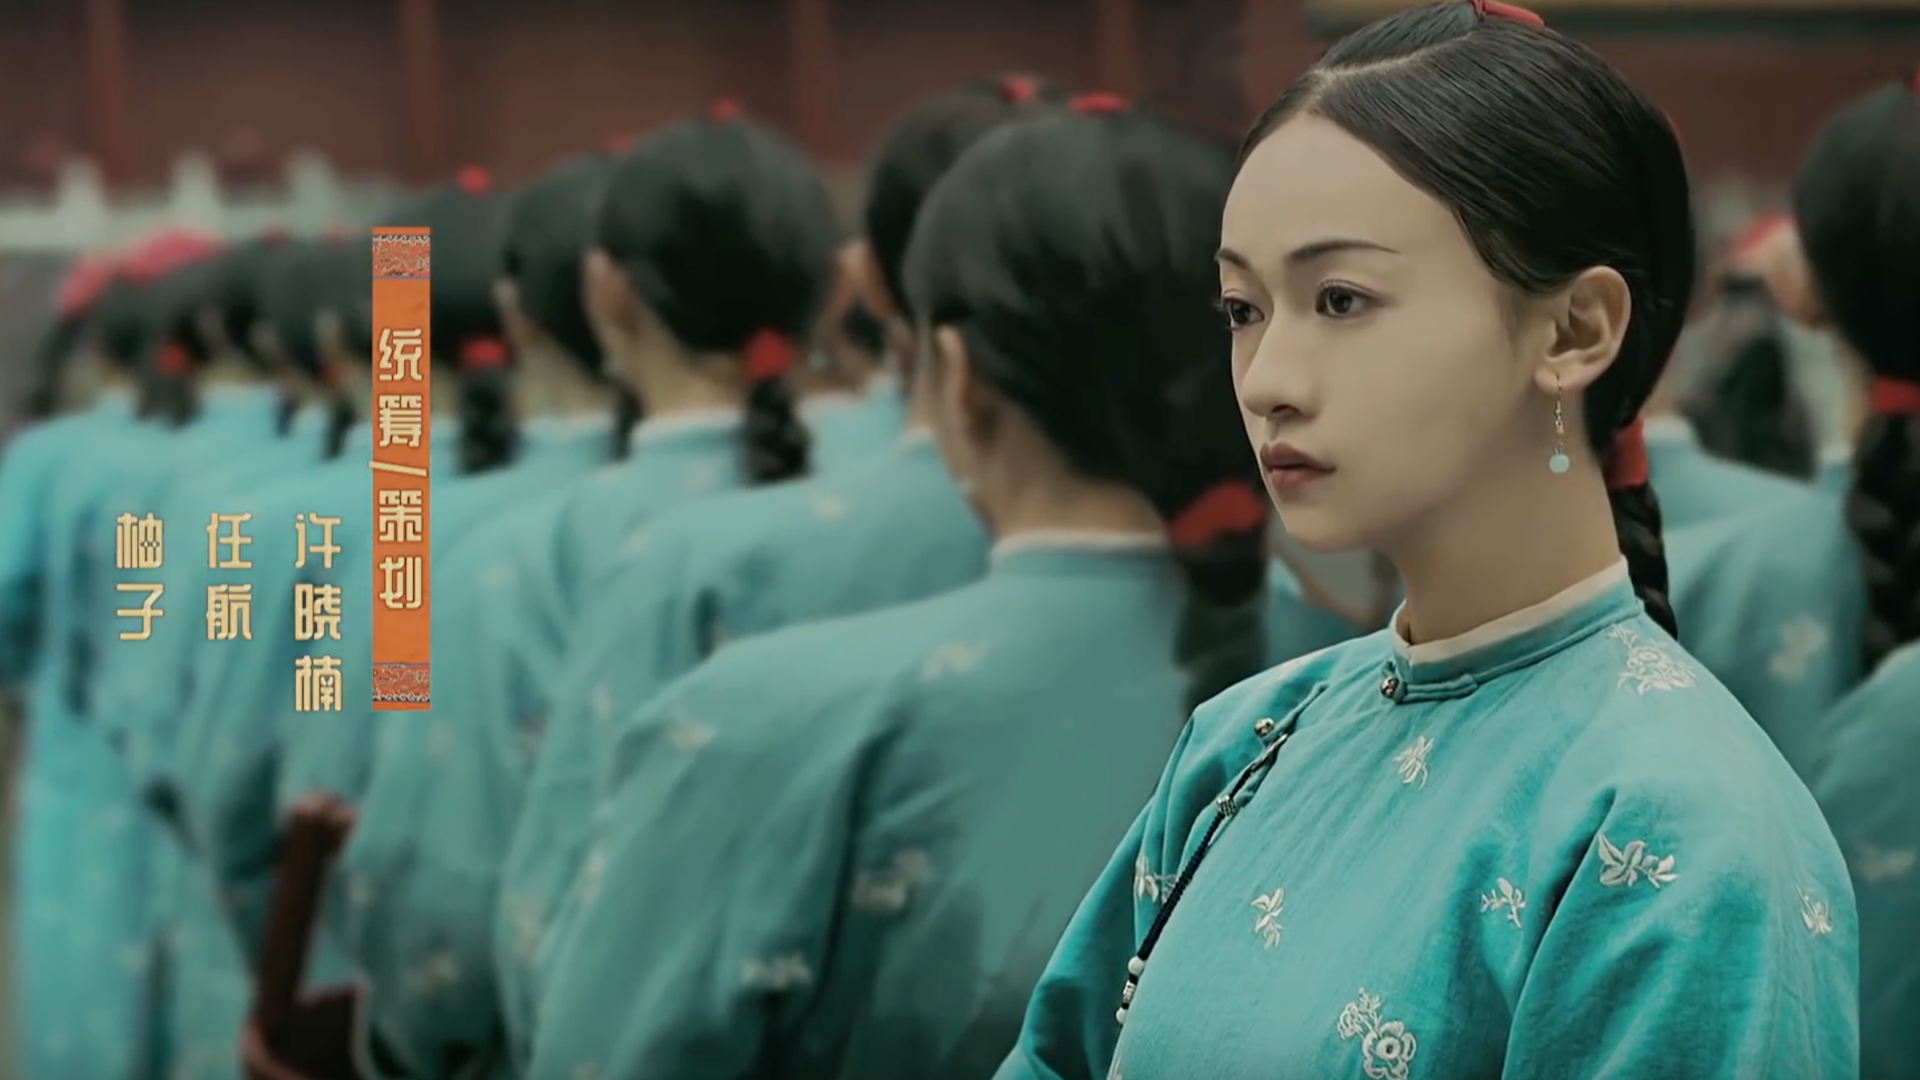 China's hottest show is an imperial concubine drama - Axios1920 x 1080